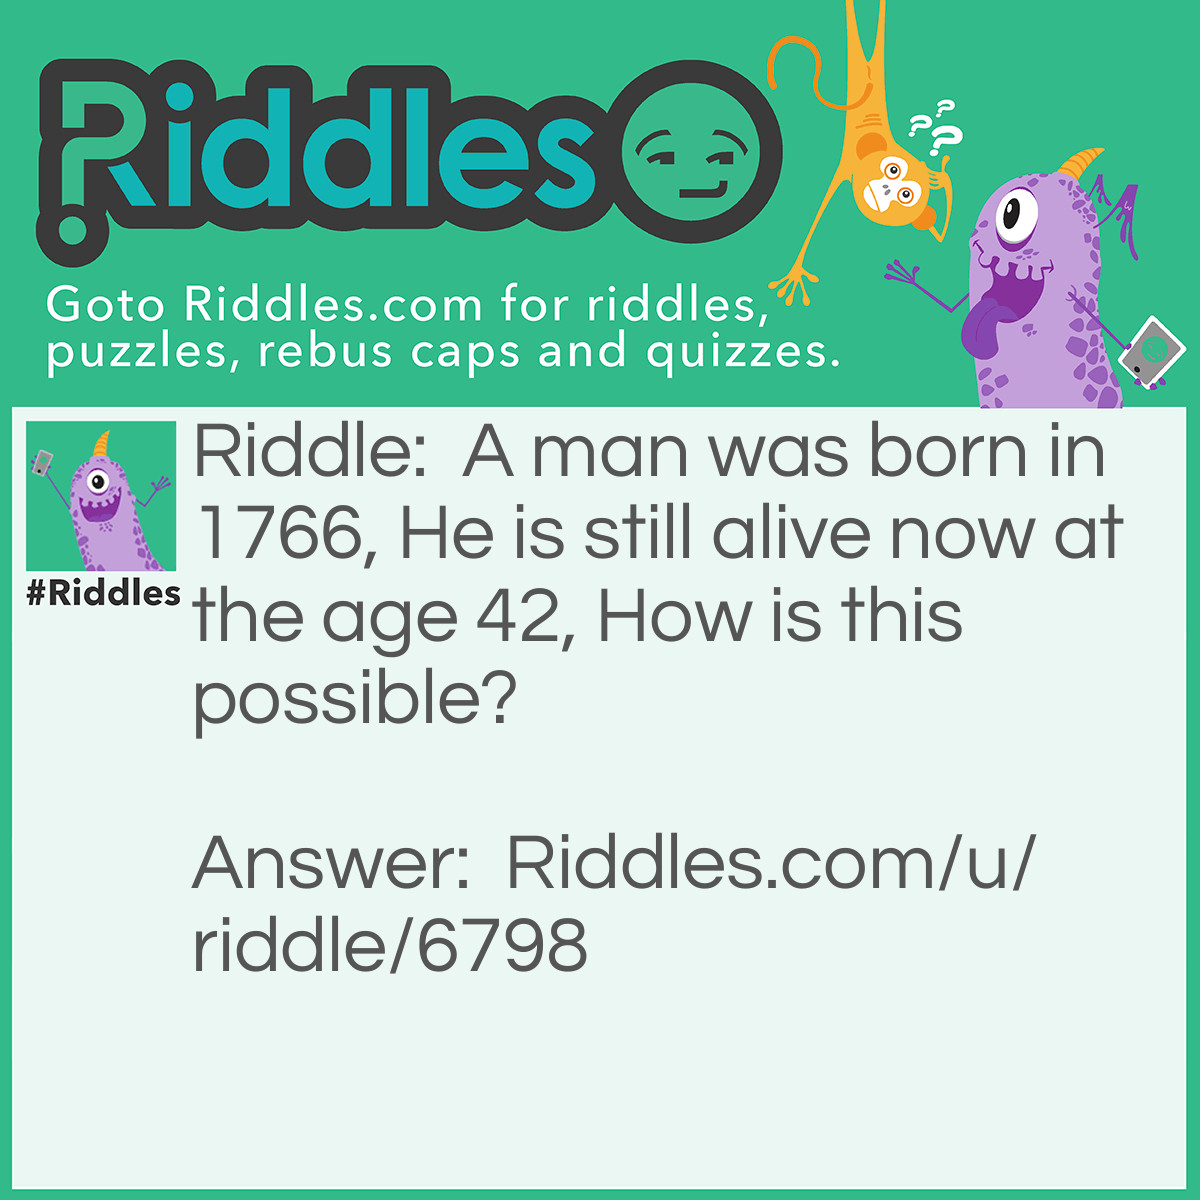 Riddle: A man was born in 1766, He is still alive now at the age 42, How is this possible? Answer: He was born in room 1766 in the hospital.